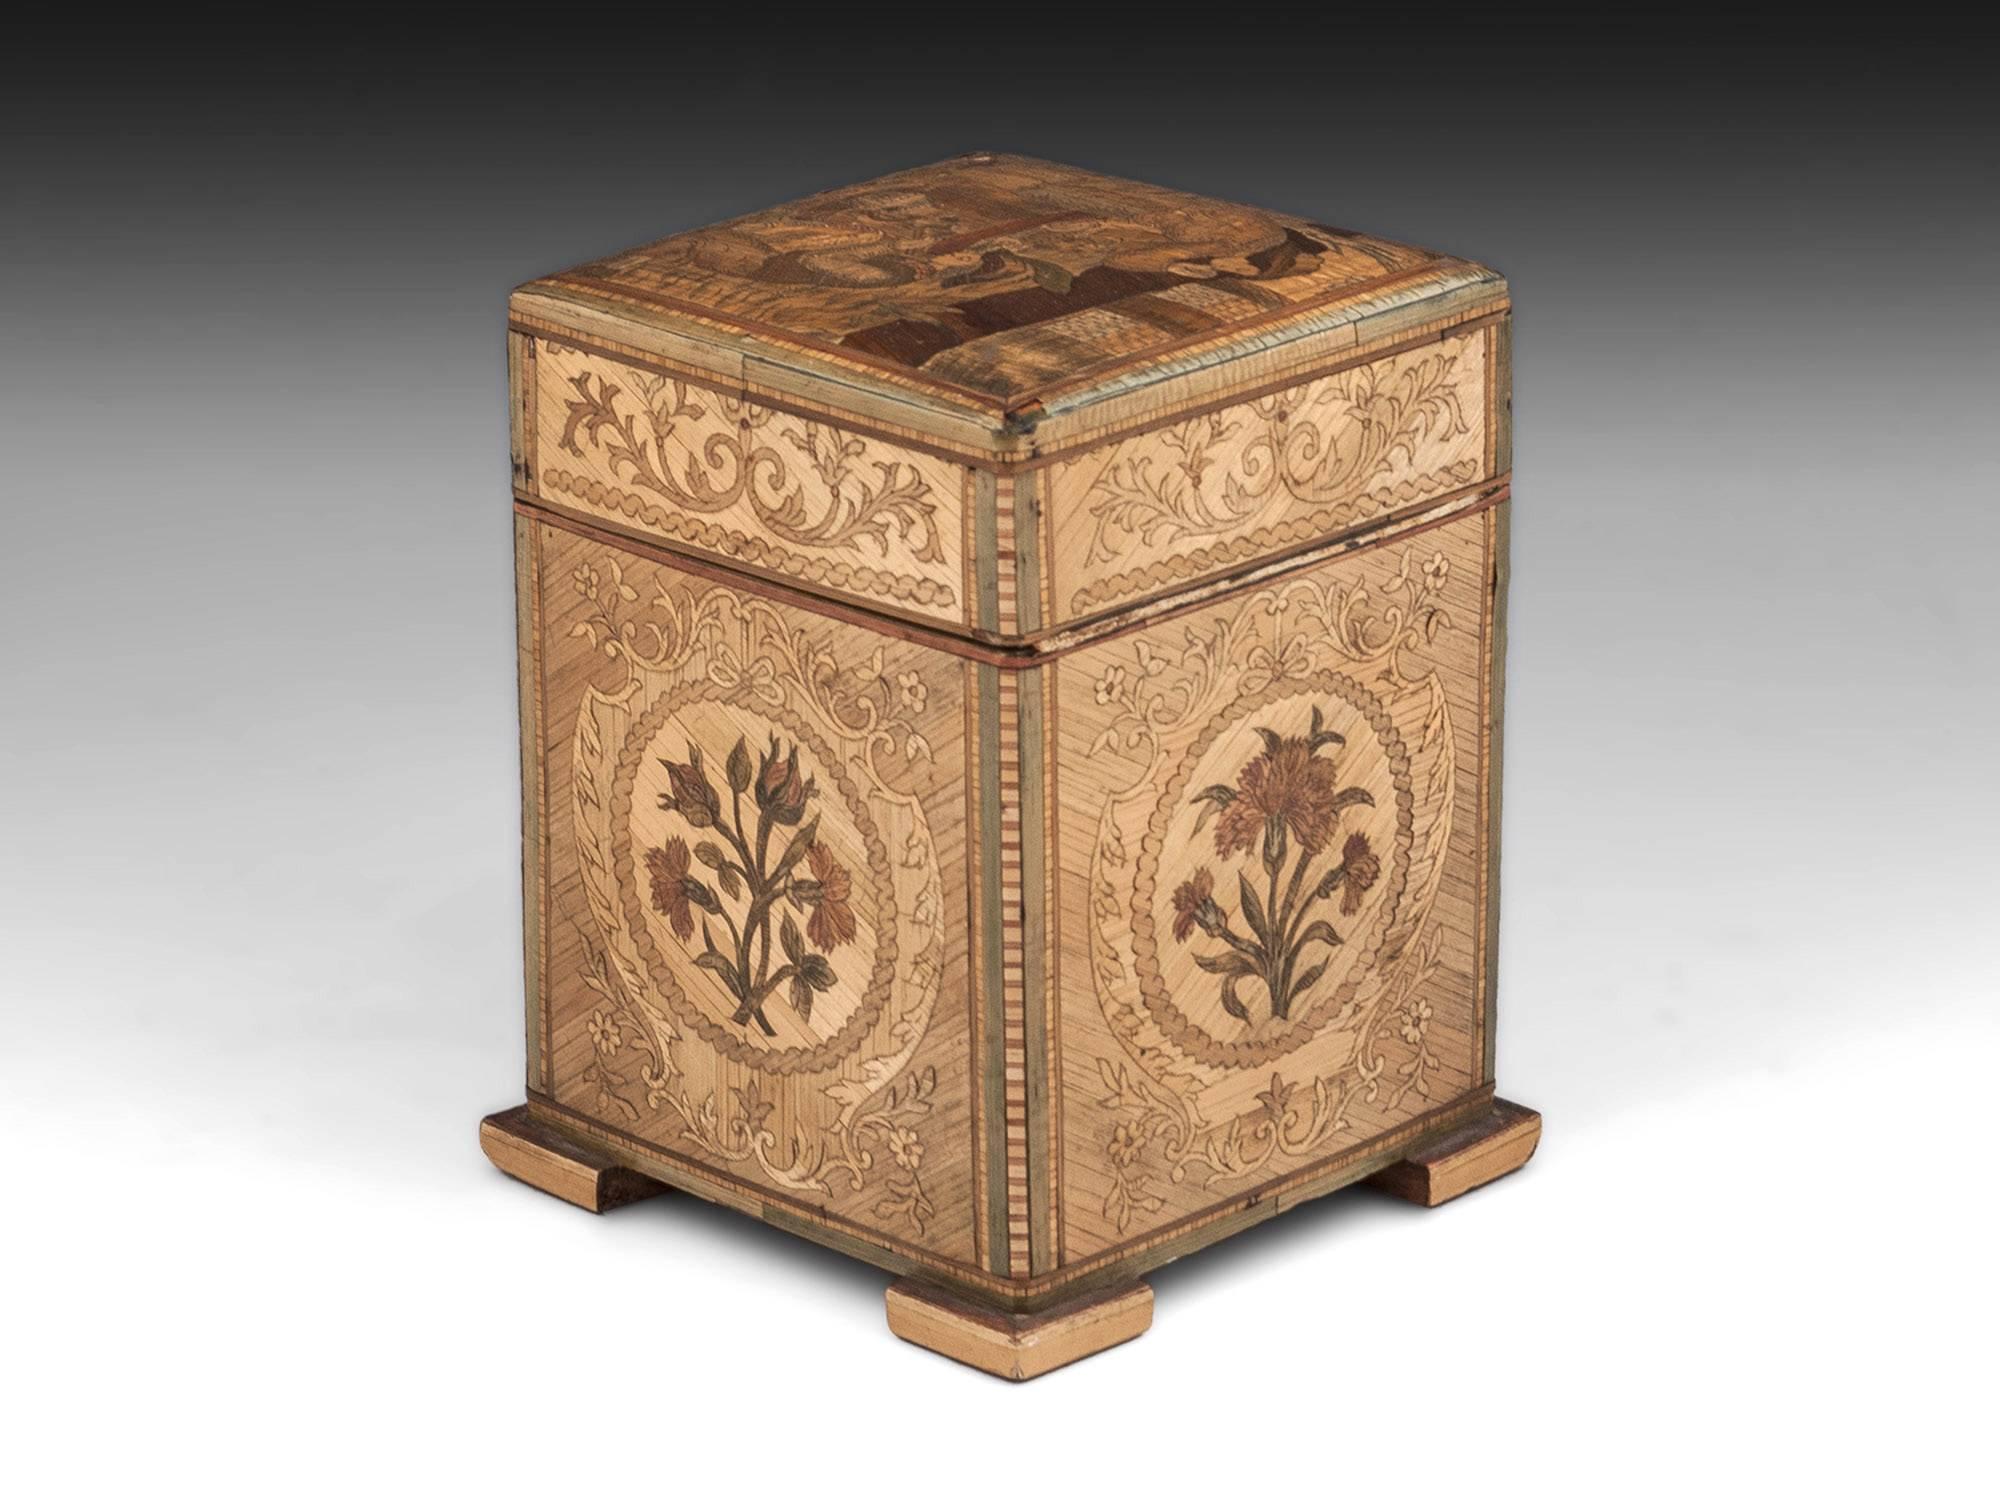 Tea Caddy Antique Continental Pine Straw Work 18th Century In Good Condition For Sale In Northampton, United Kingdom